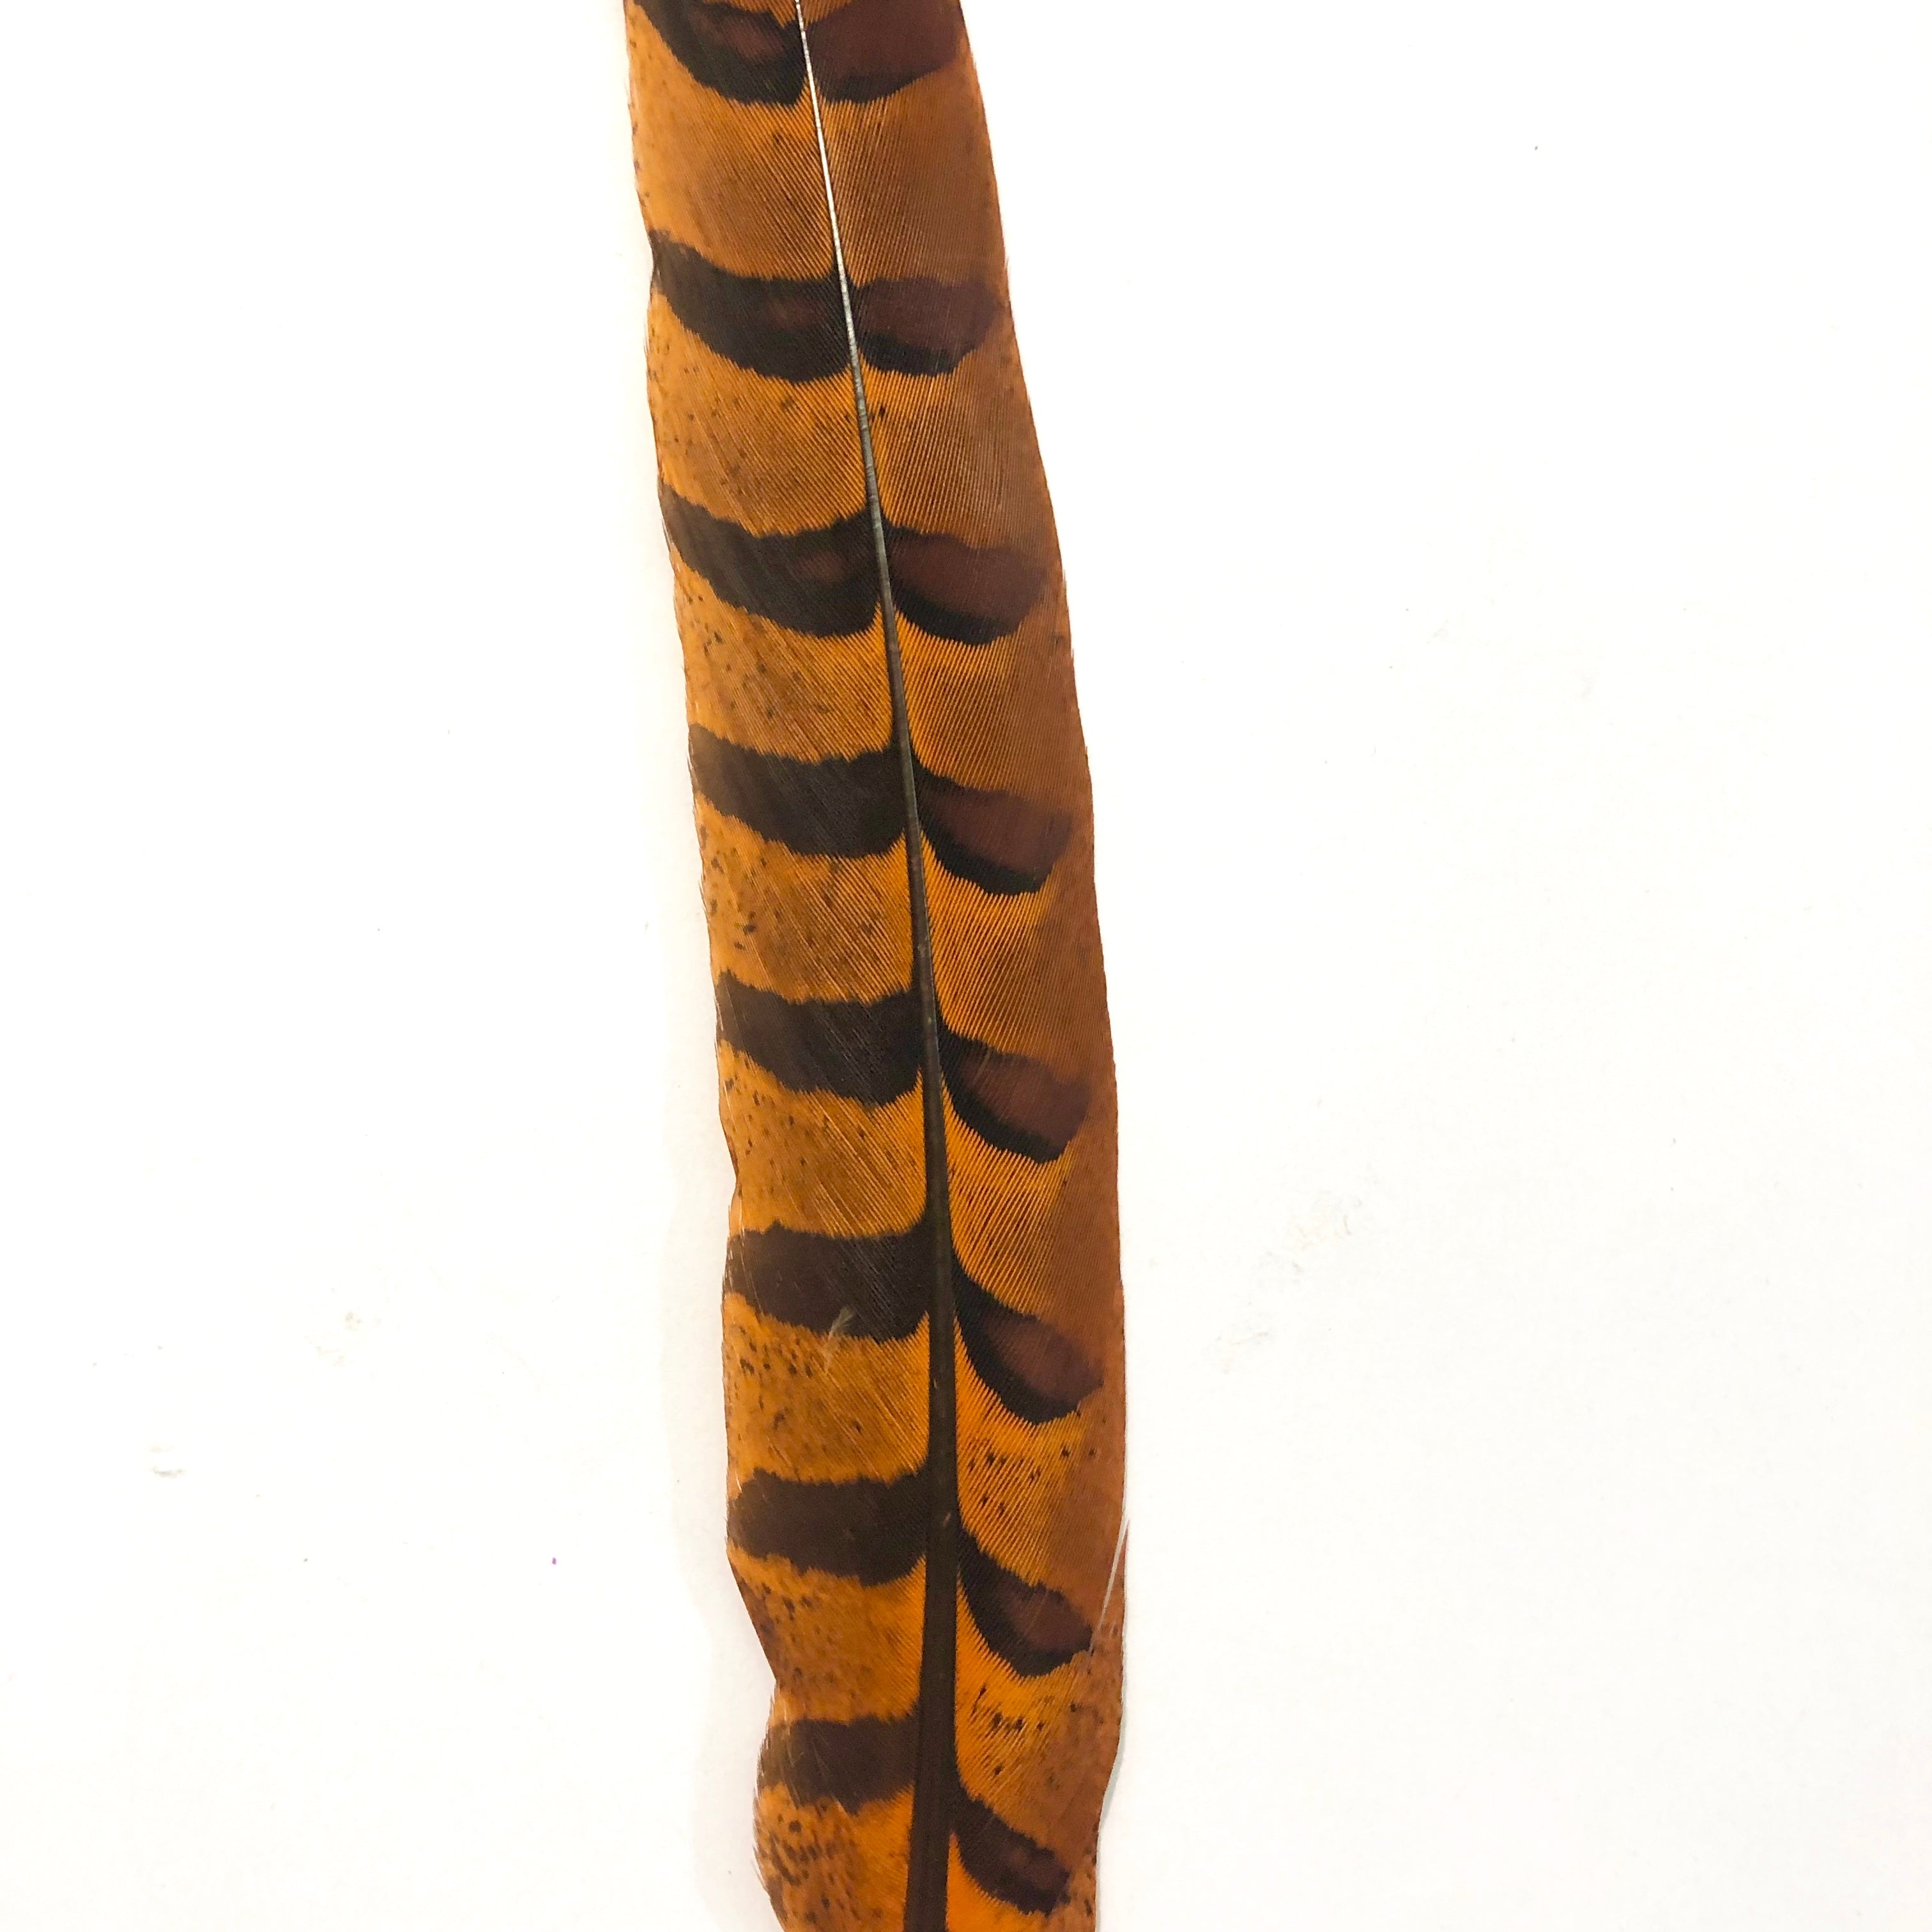 12" to 14" Reeves Pheasant Tail Feather - Orange ((SECONDS))